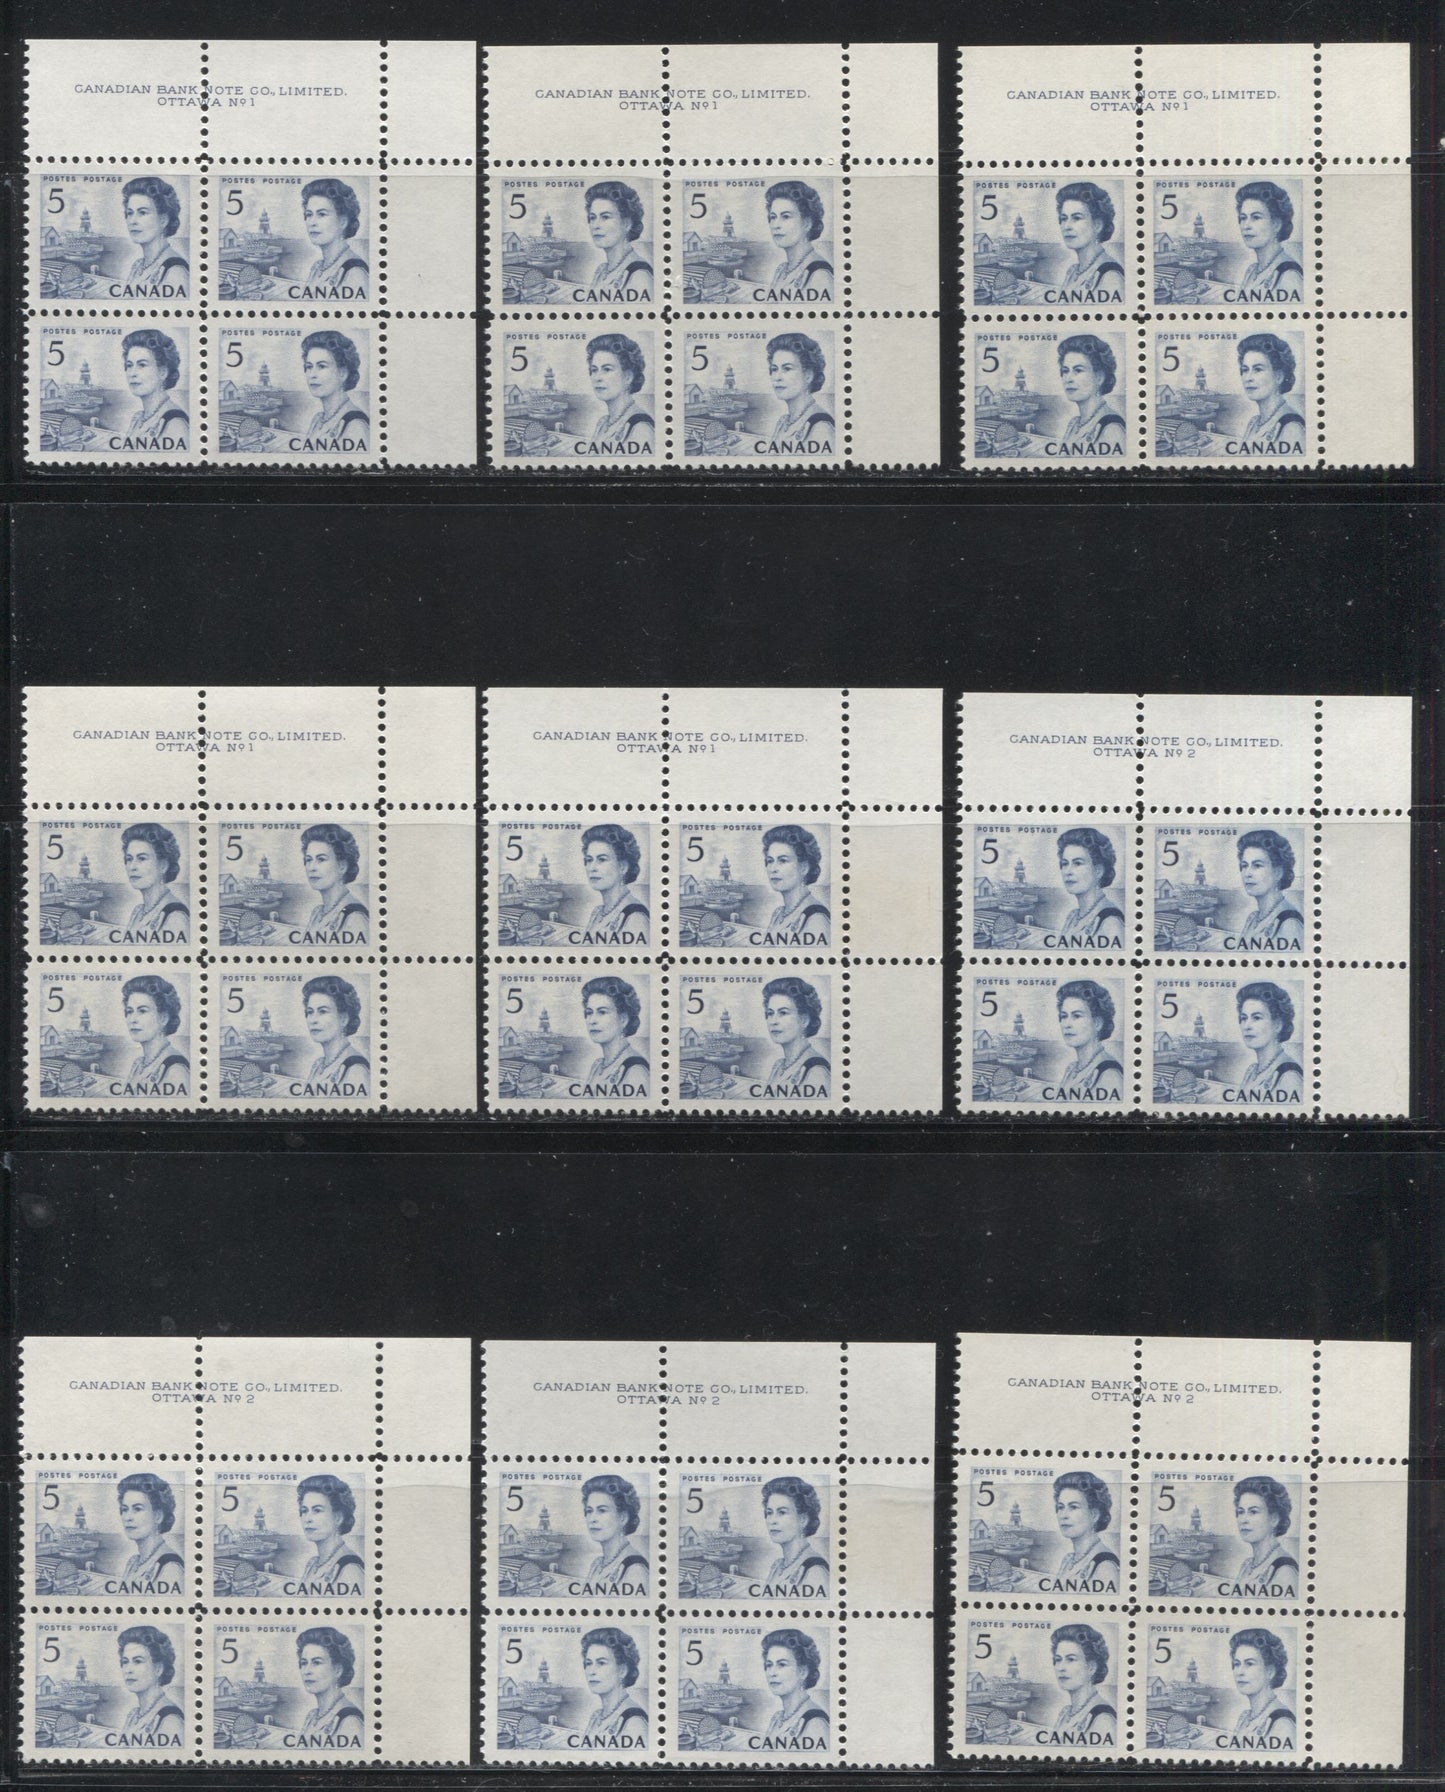 Lot 194 Canada #458/458ii, 458iv, v 5c Deep Blue Atlantic Fishing Village, 1967-1973 Centennial Definitive Issue, Upper Right Plate 1-6 Corner Blocks, A Specialized VFNH Group of 23 Blocks on Different Papers, Different Shades and Different Gums